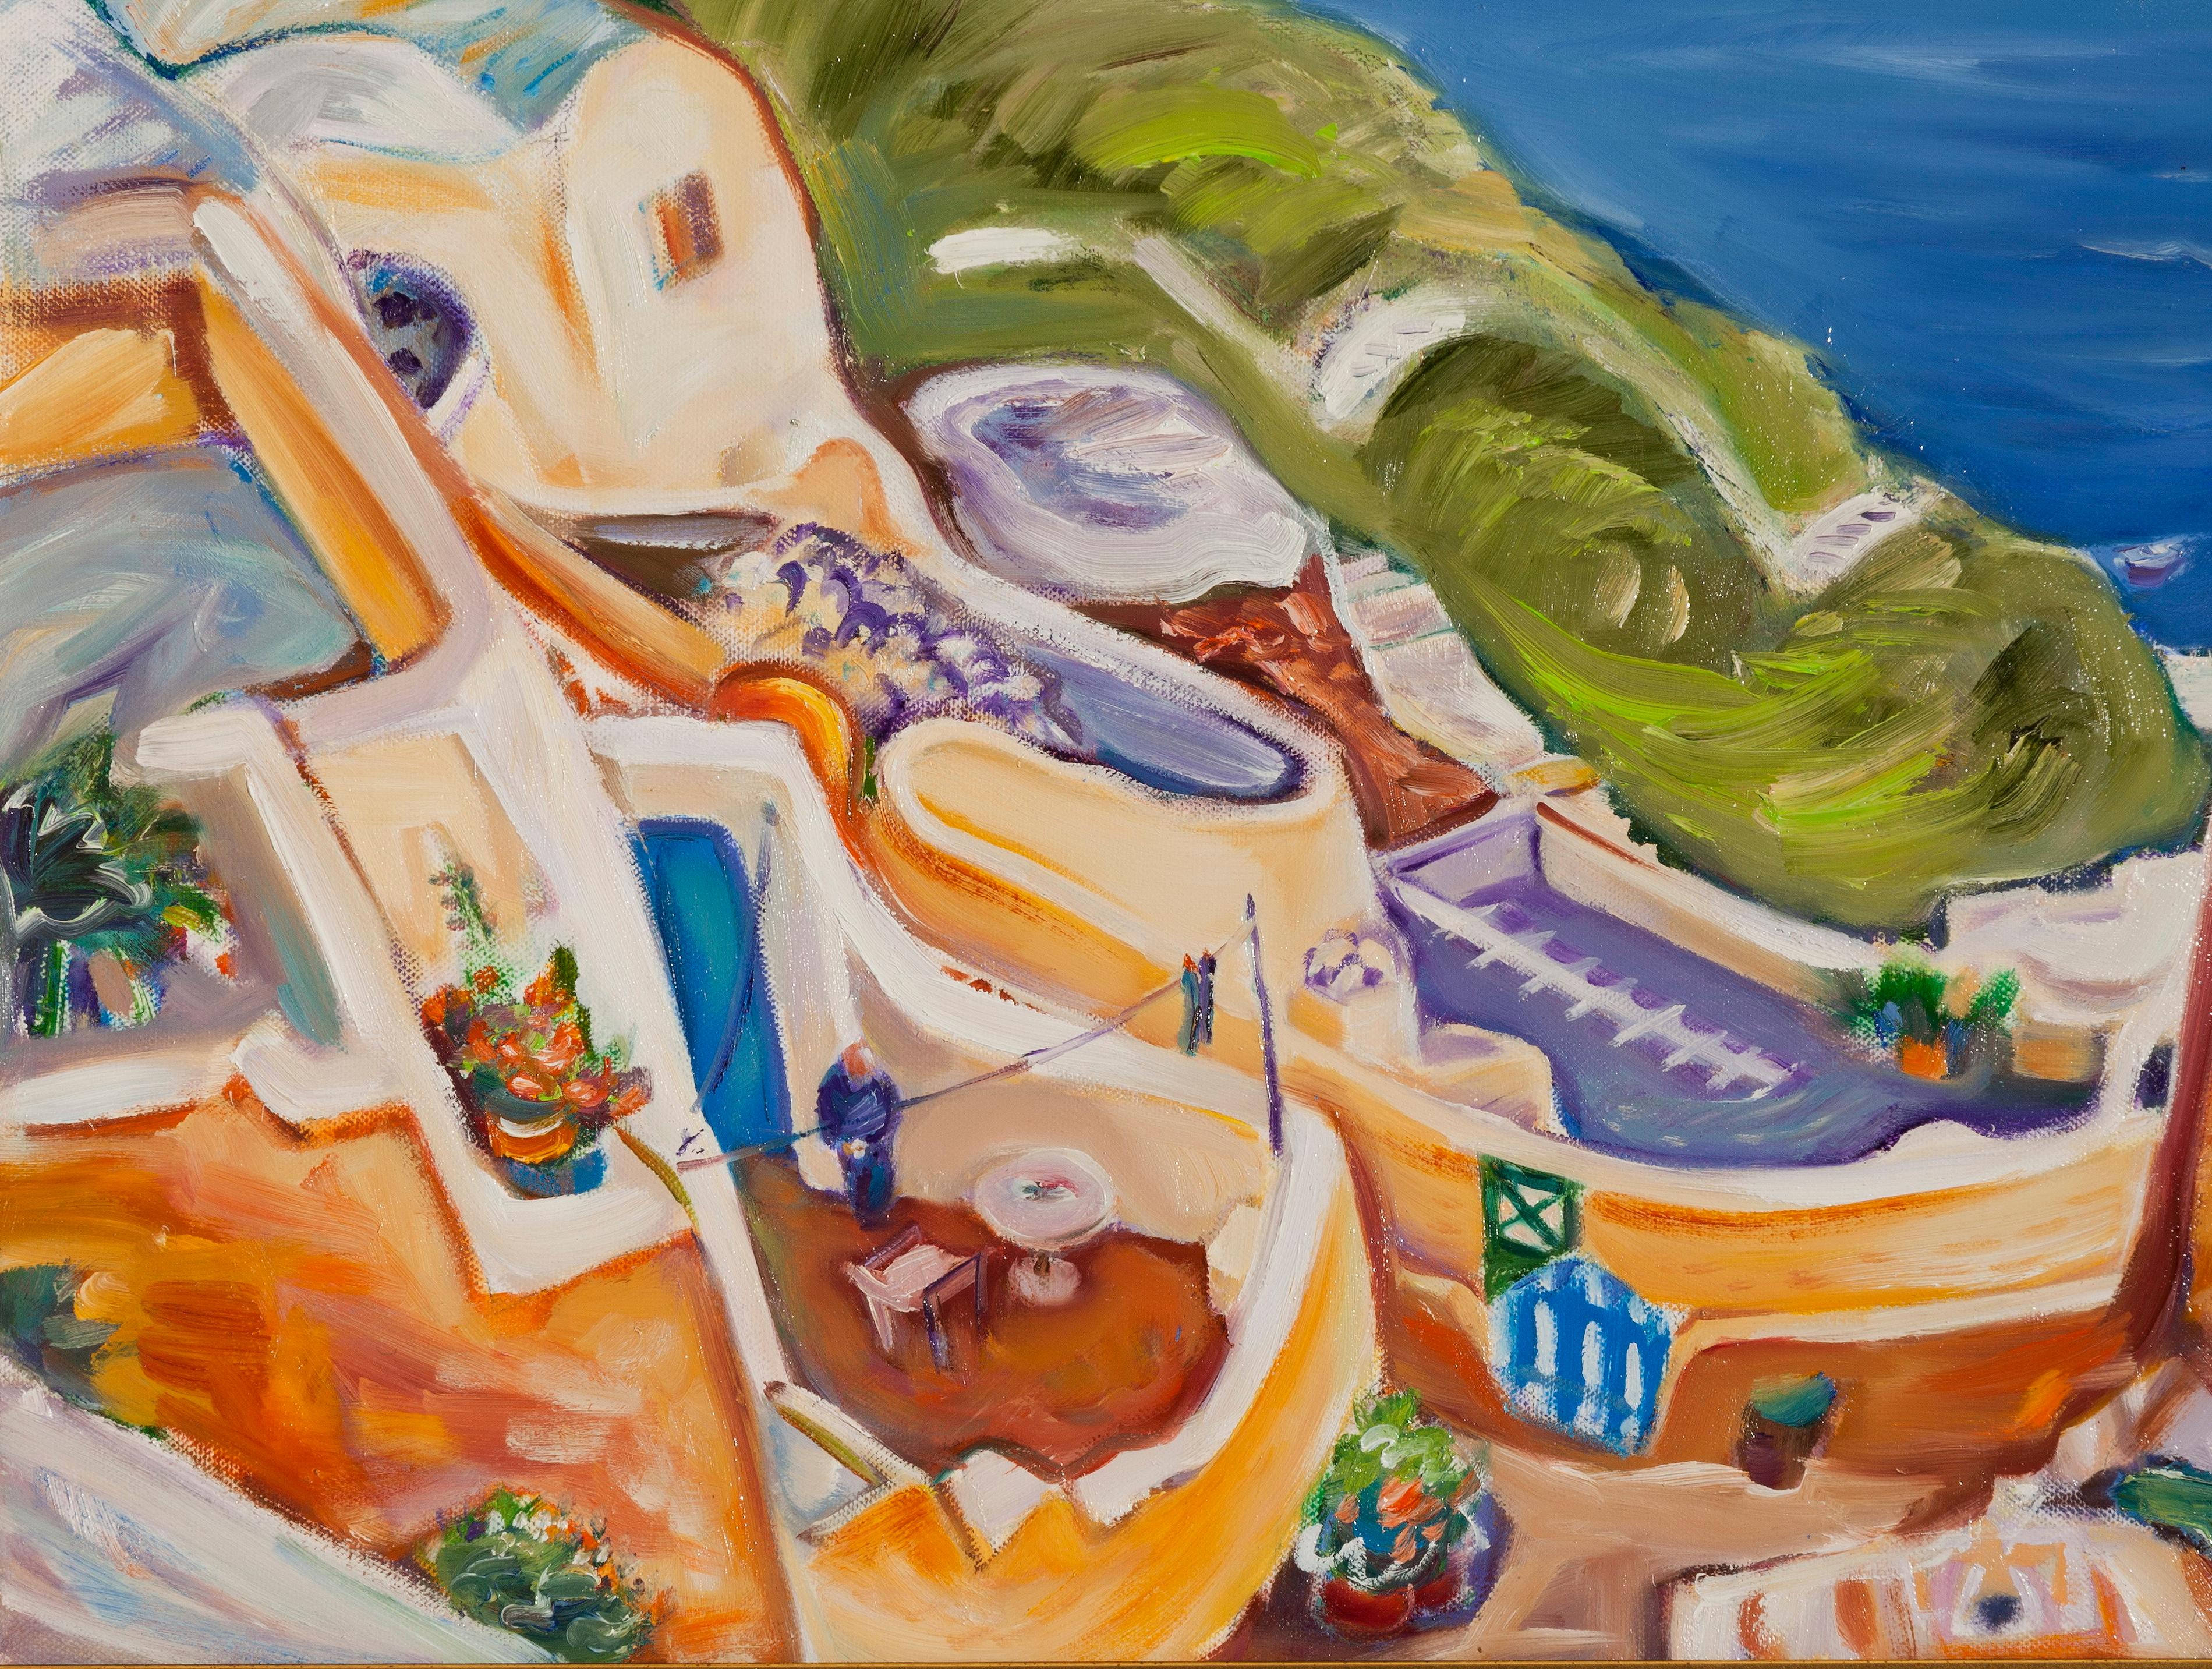 "Santorini, live in Ia " is an modernist painting by Maestro Krassimira Mihaylova.

About the artwork:

TECHNIQUE:  oil painting
STYLE: Impressionist, Contemporary
Edition : Unique, signed
Weight: Approximately 2 kg.

The painting is